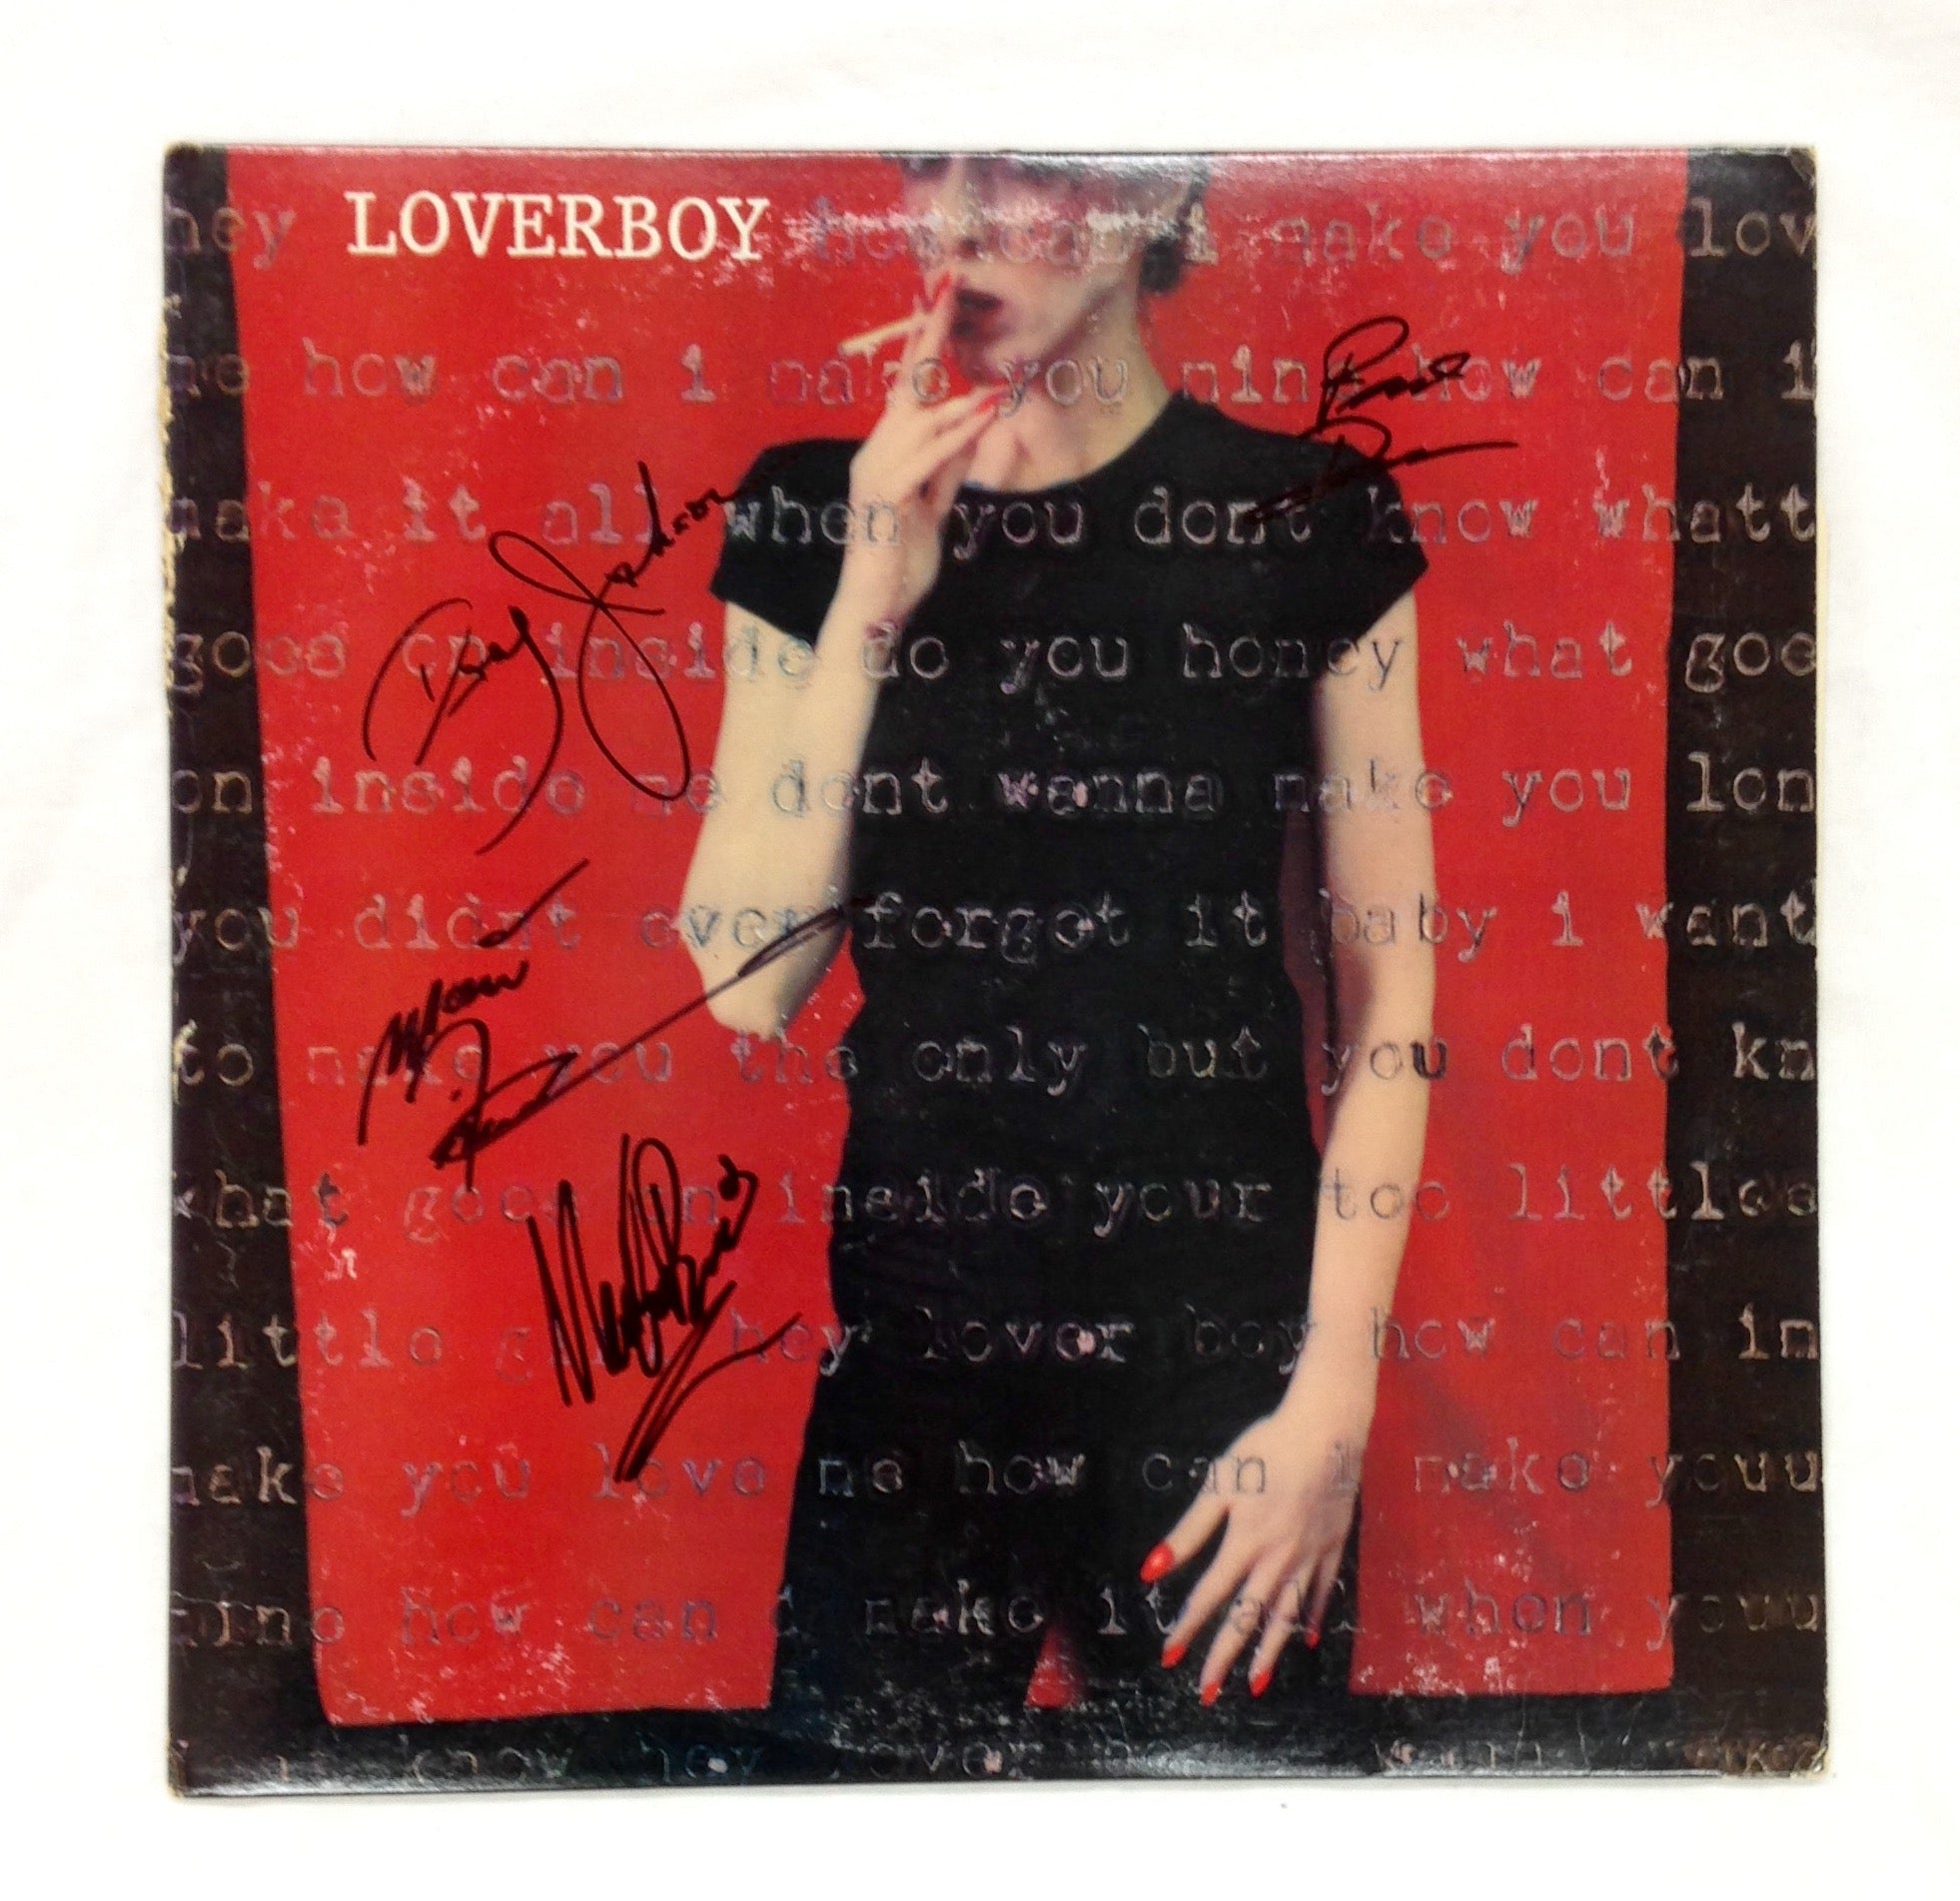 Signed LP record - Loverboy